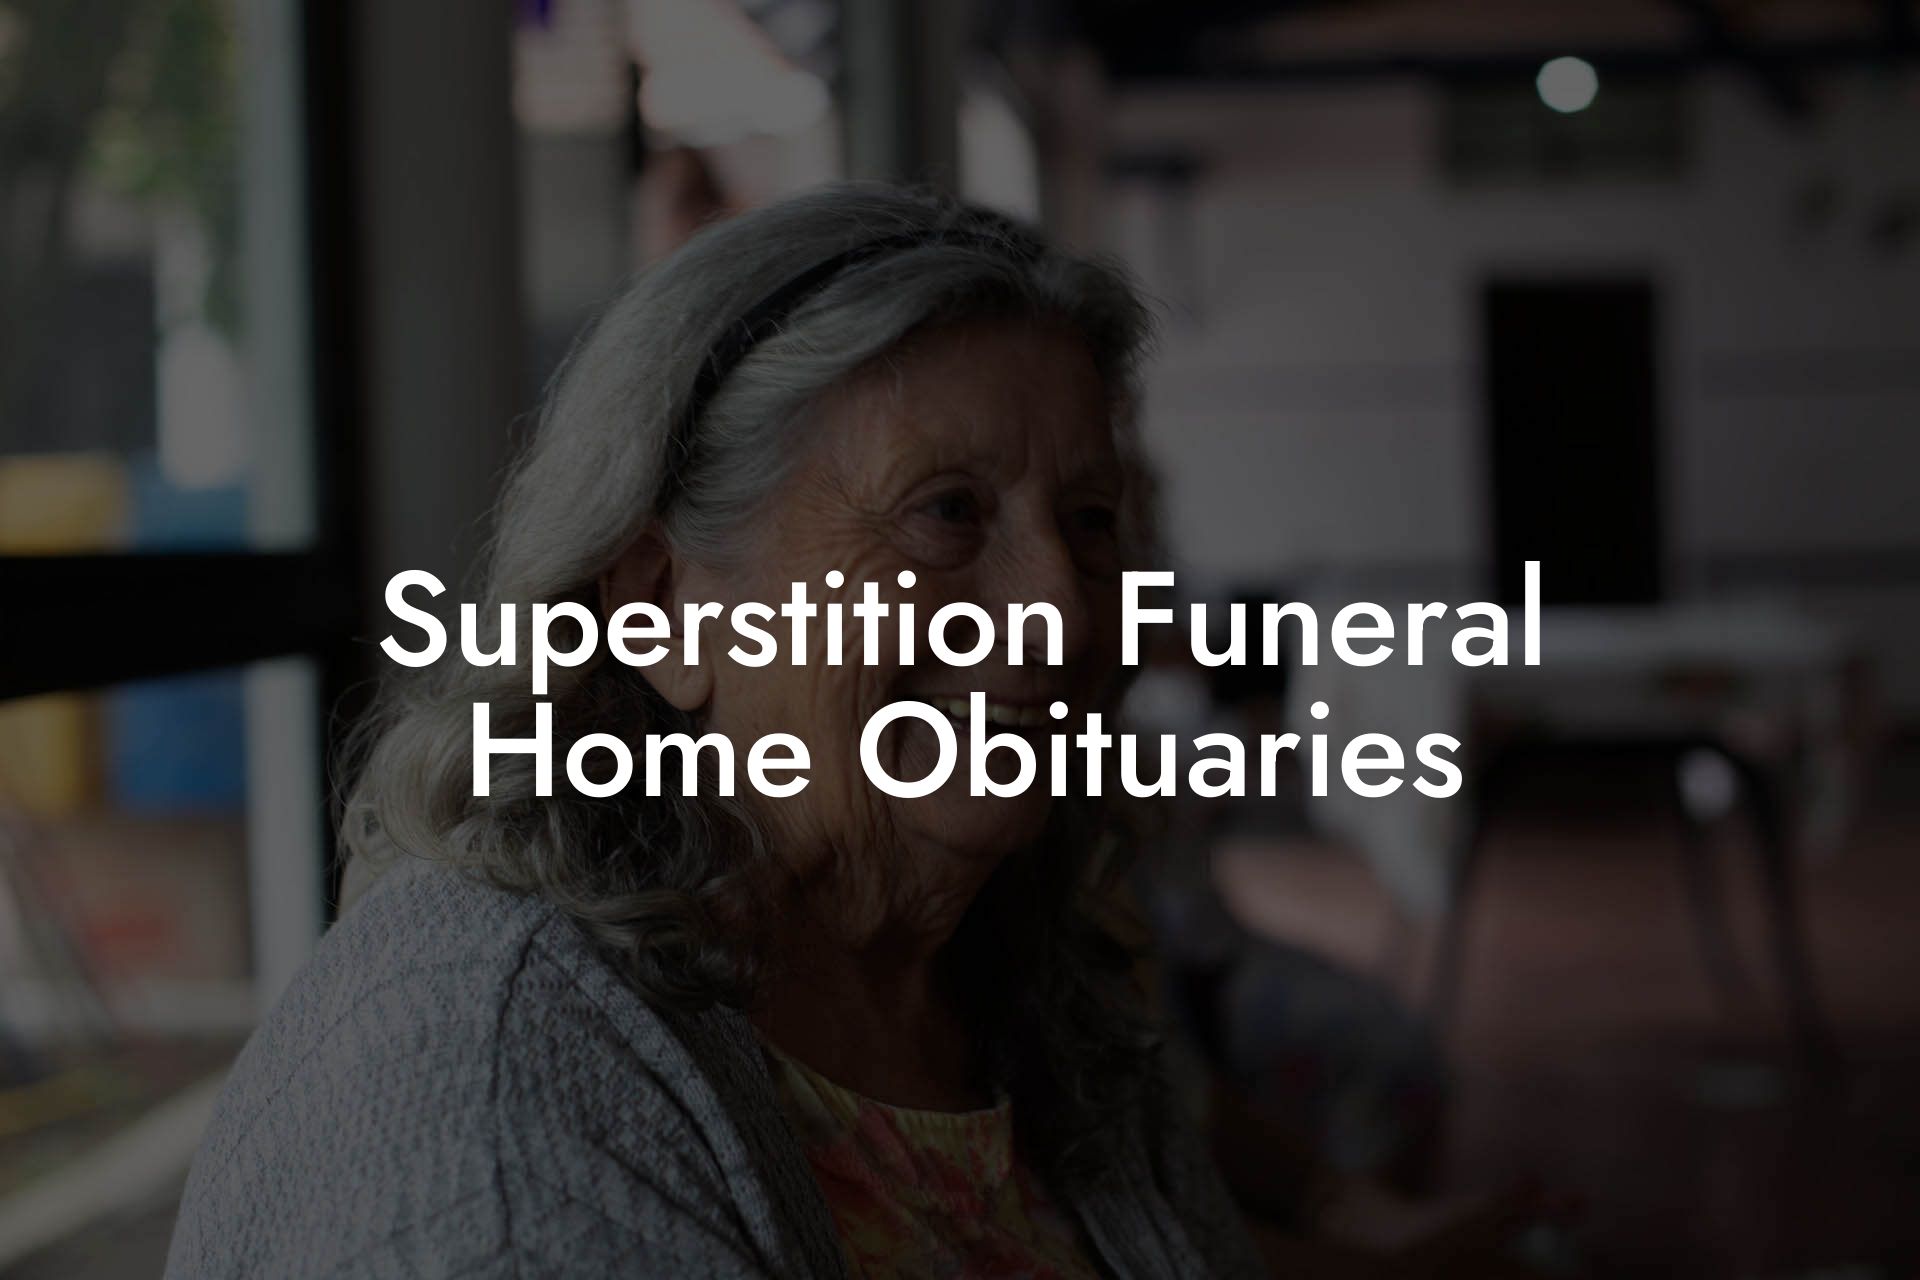 Superstition Funeral Home Obituaries